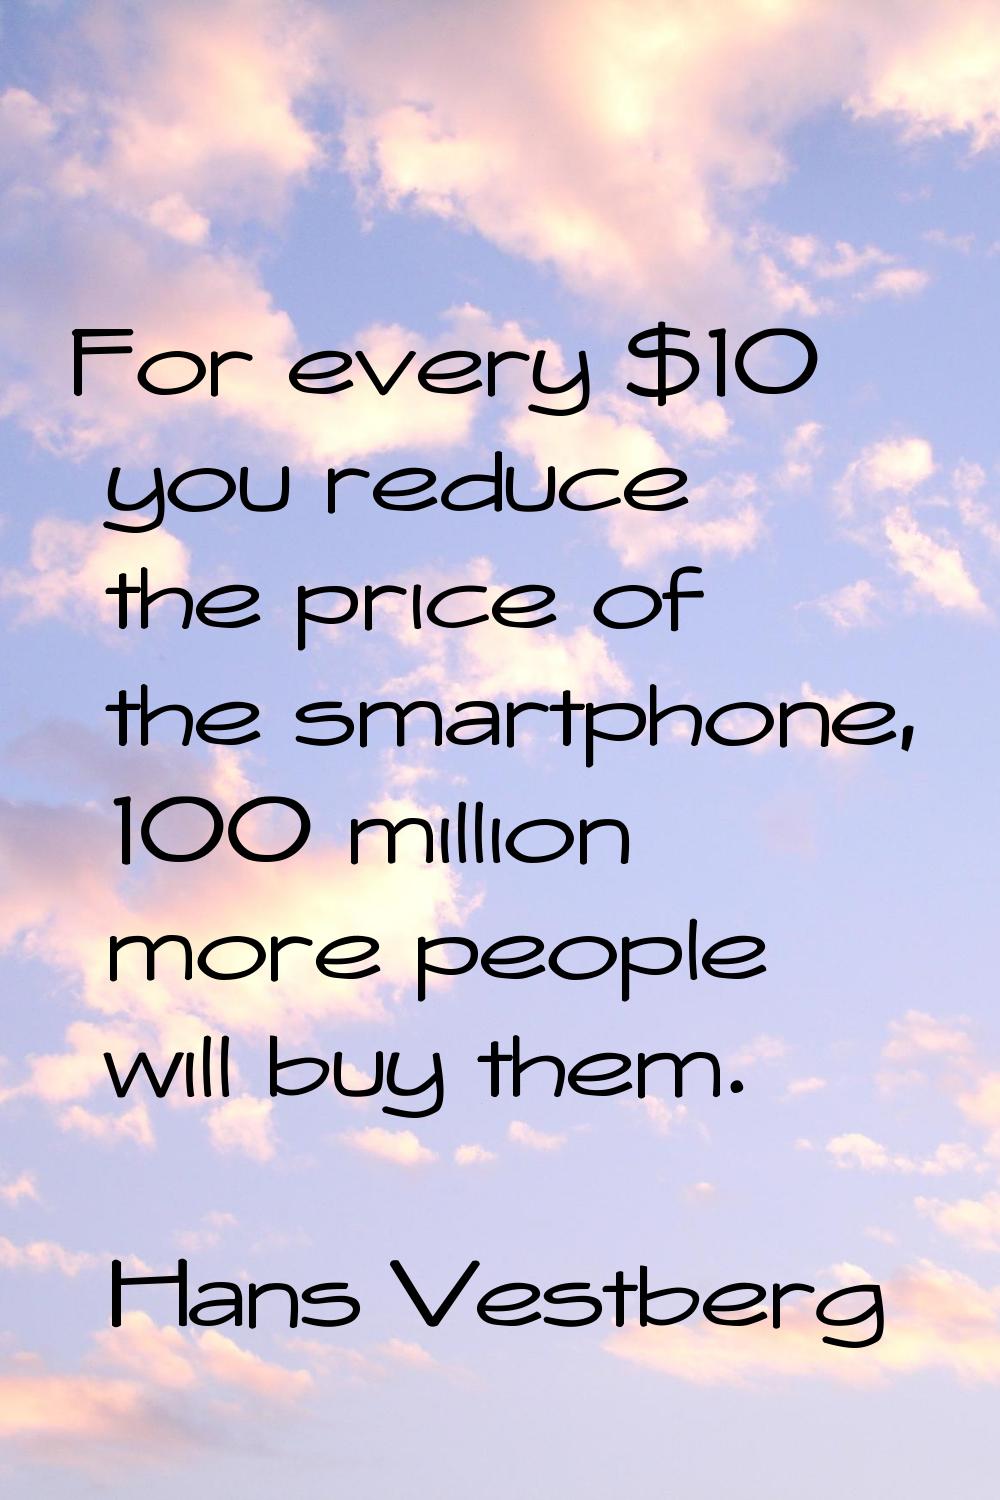 For every $10 you reduce the price of the smartphone, 100 million more people will buy them.